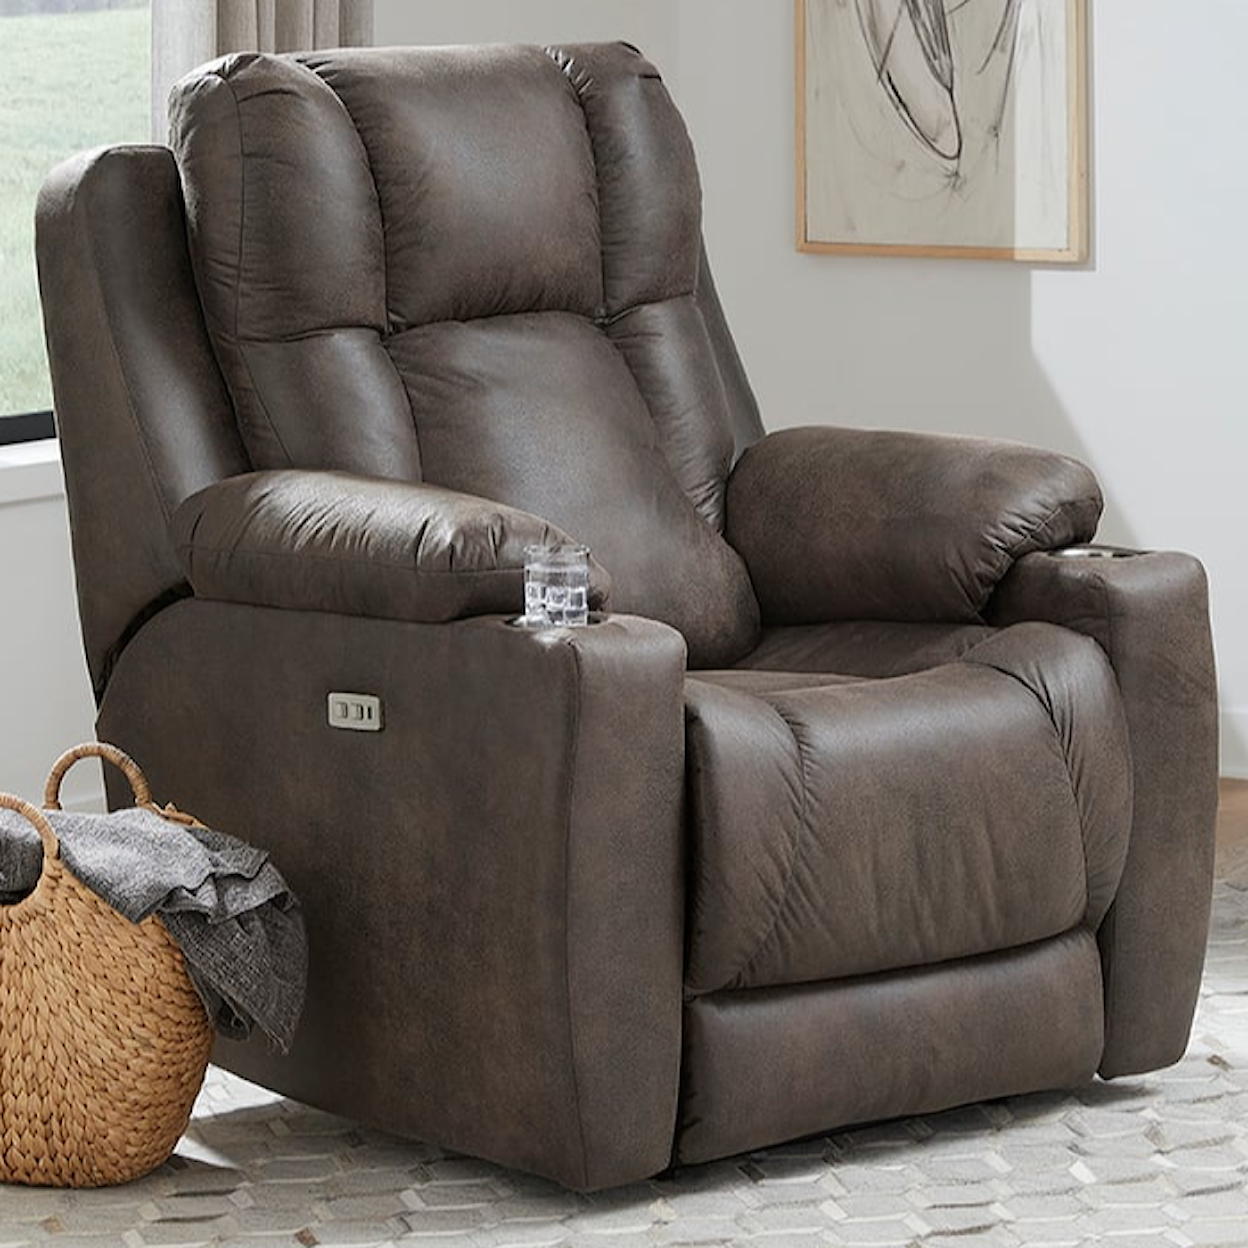 Southern Motion Challenger Pwr Hdrst Big Man's Wall Hugger Recliner